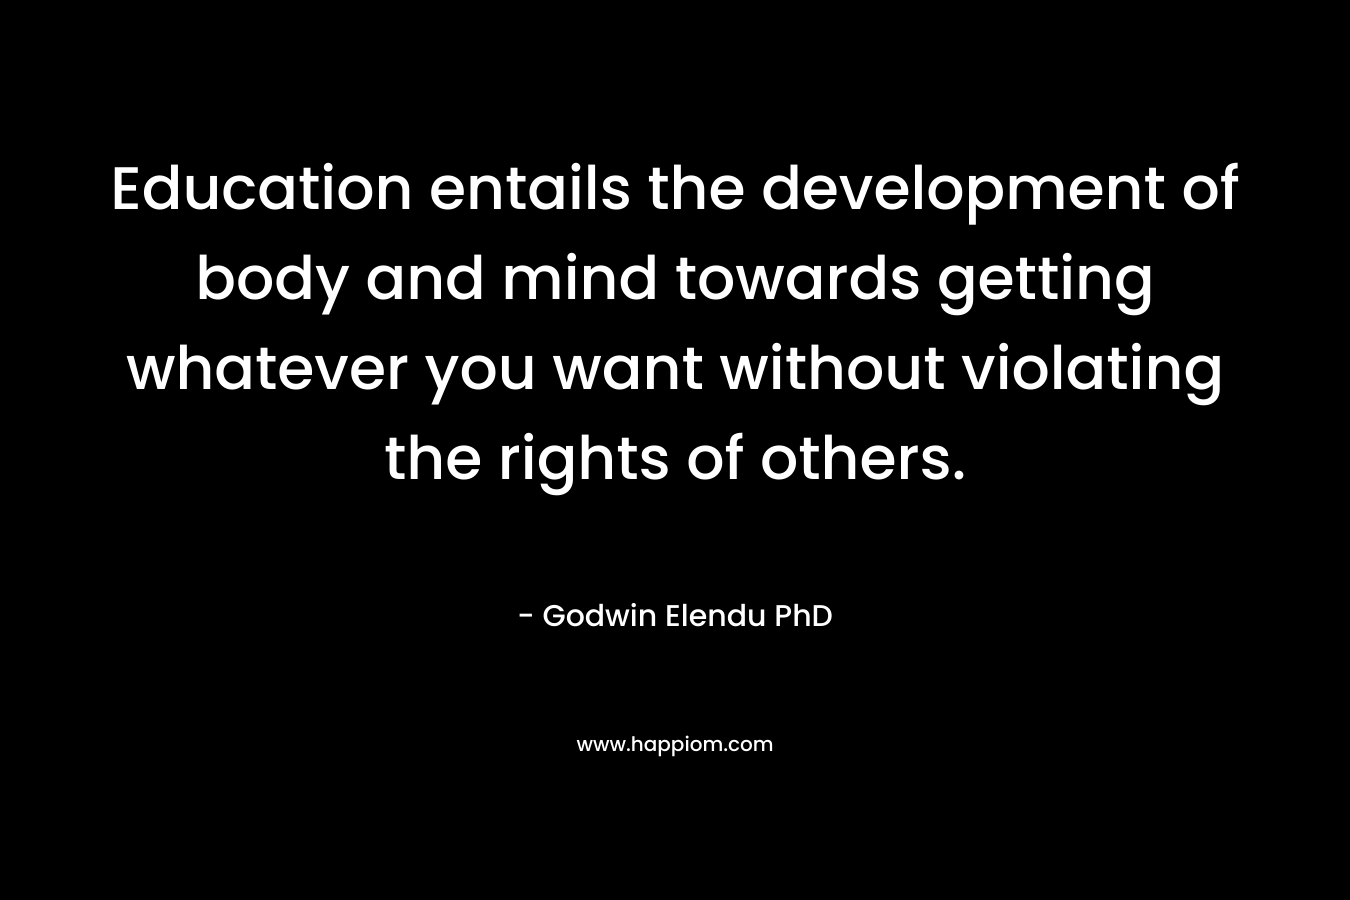 Education entails the development of body and mind towards getting whatever you want without violating the rights of others.